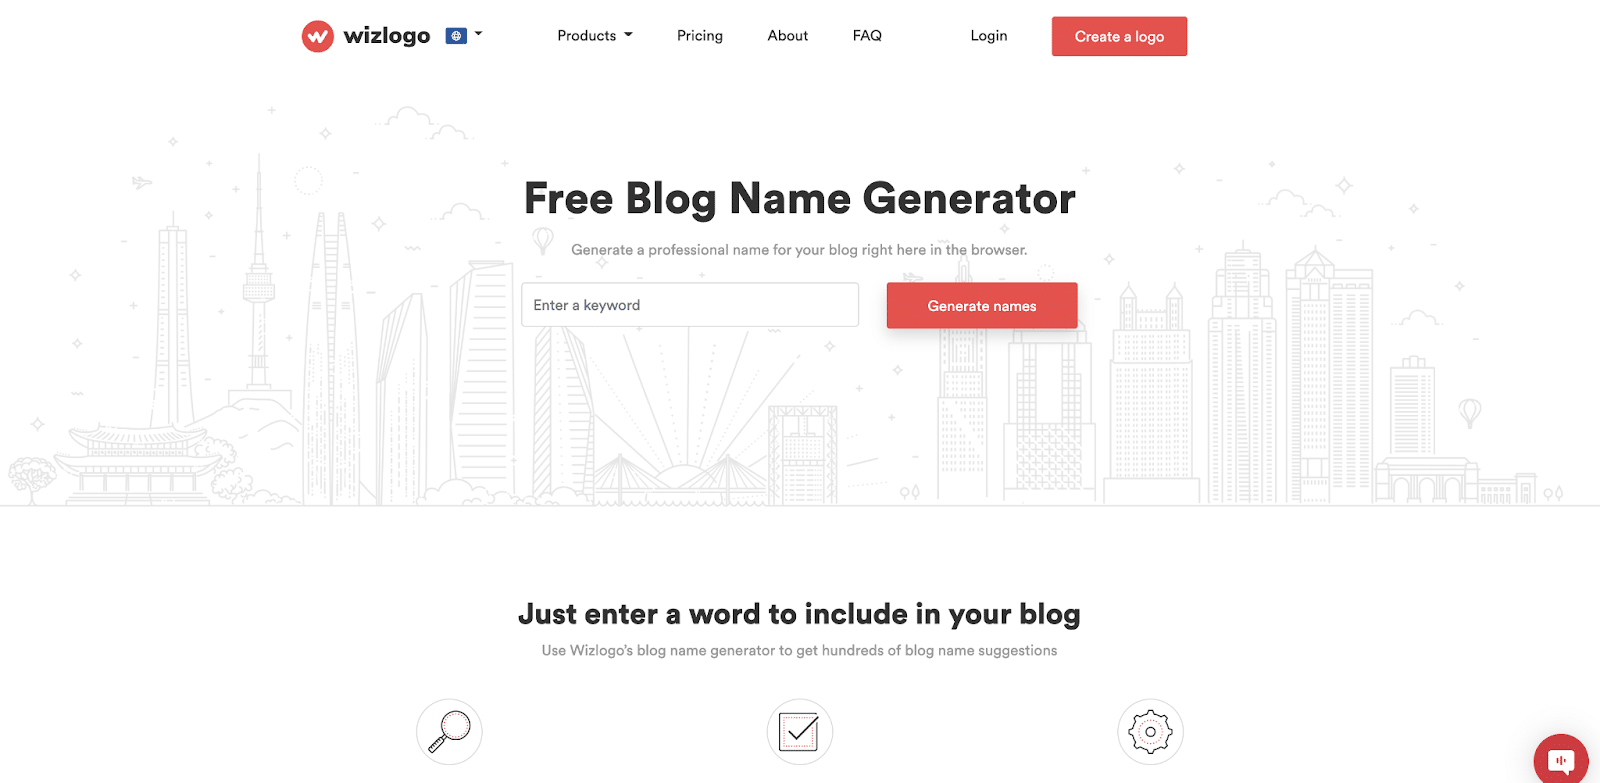 Wizlogo is a free and easy-to-use blog name generator